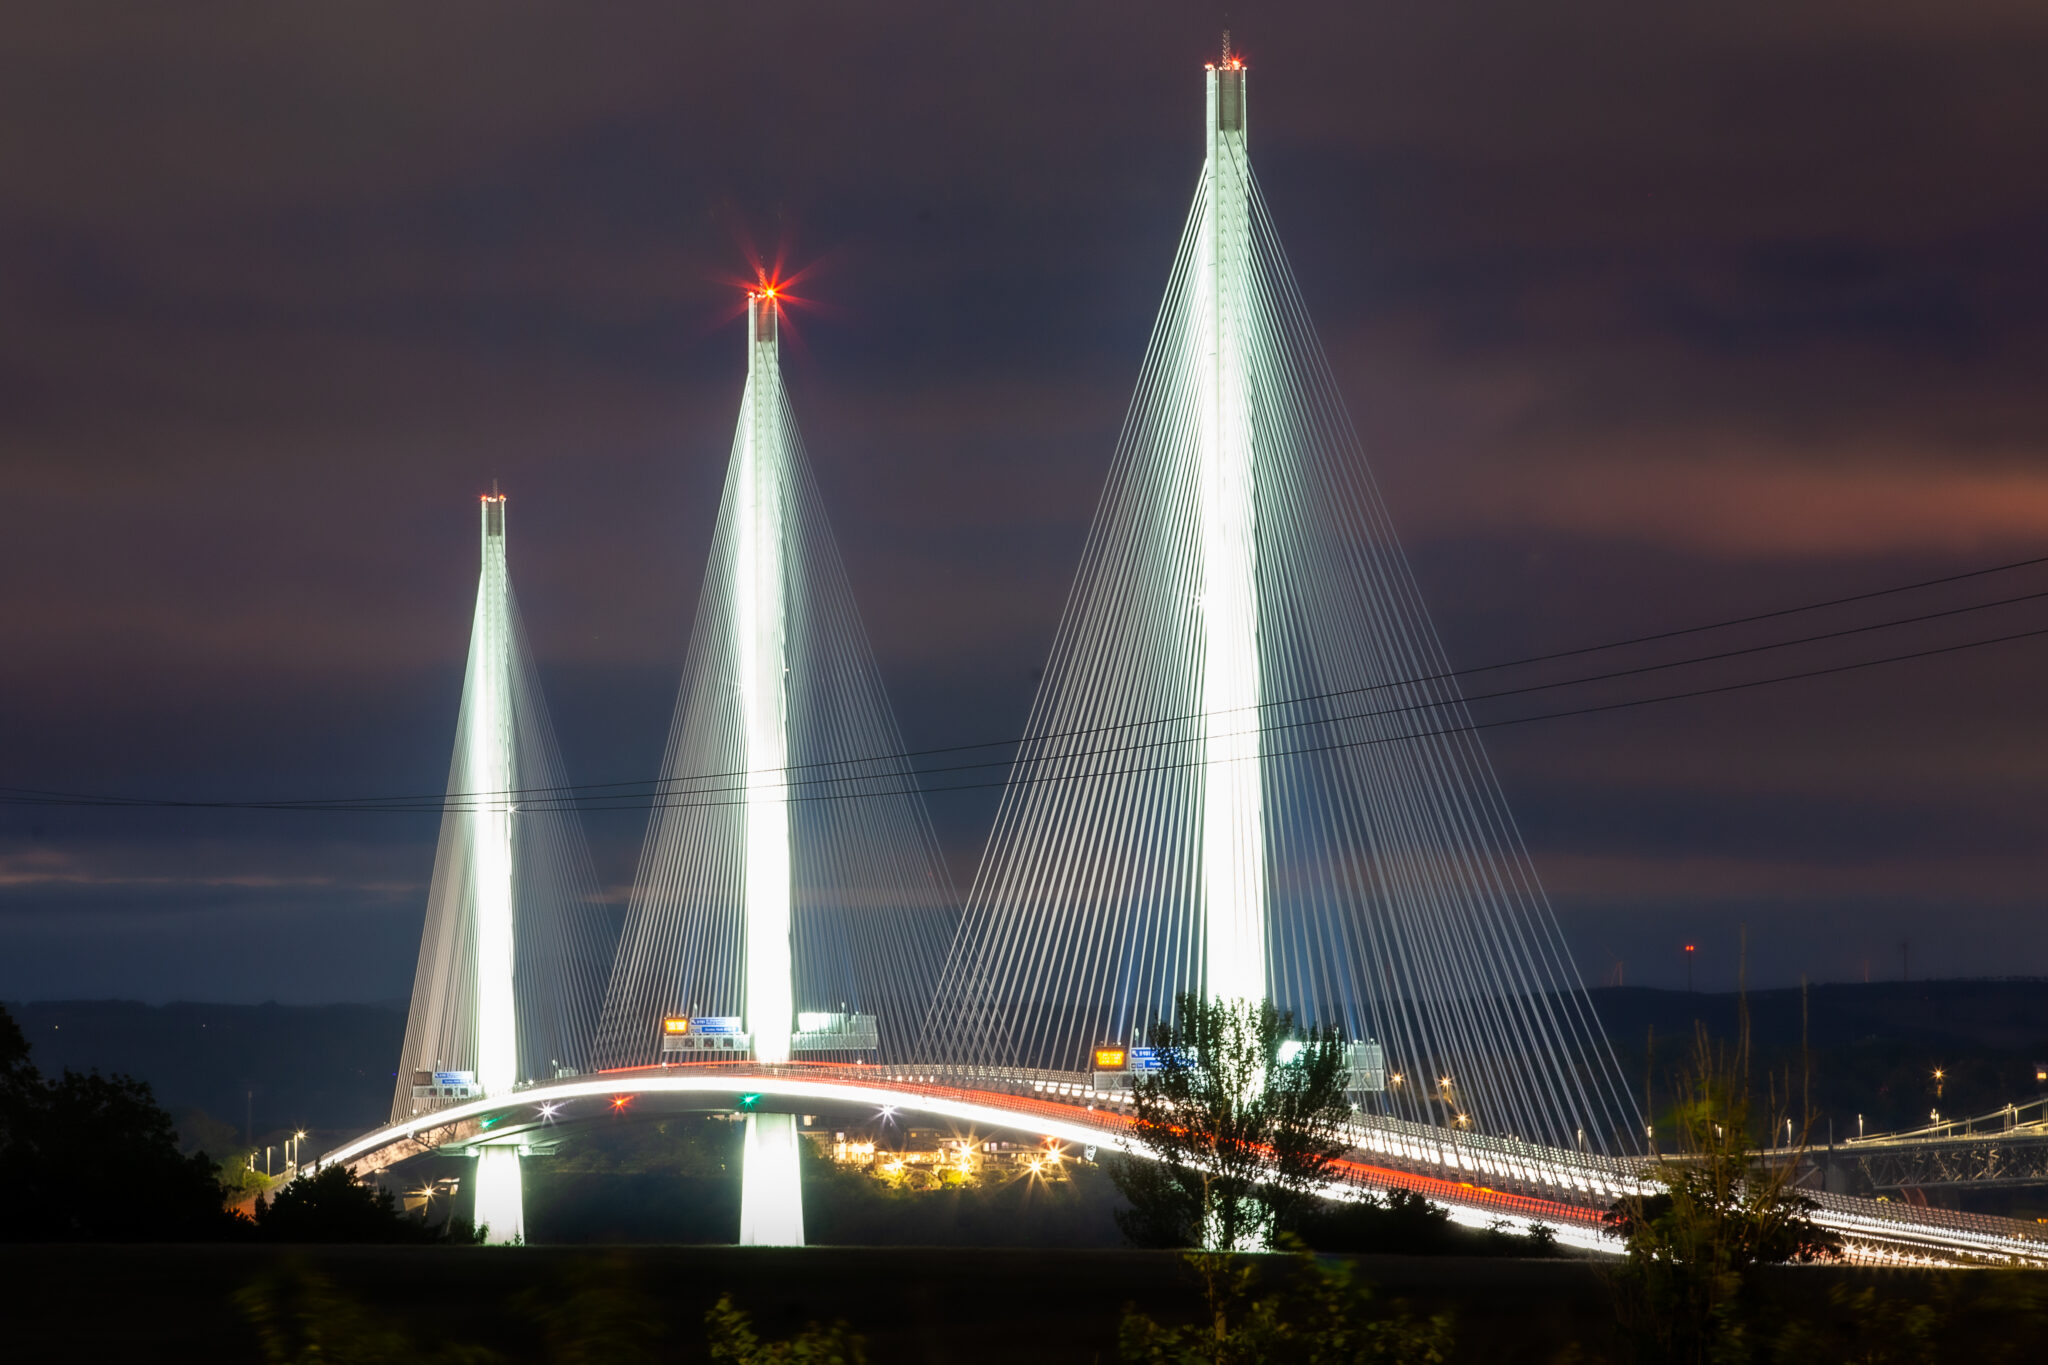 QUEENSFERRY CROSSING CLOSED